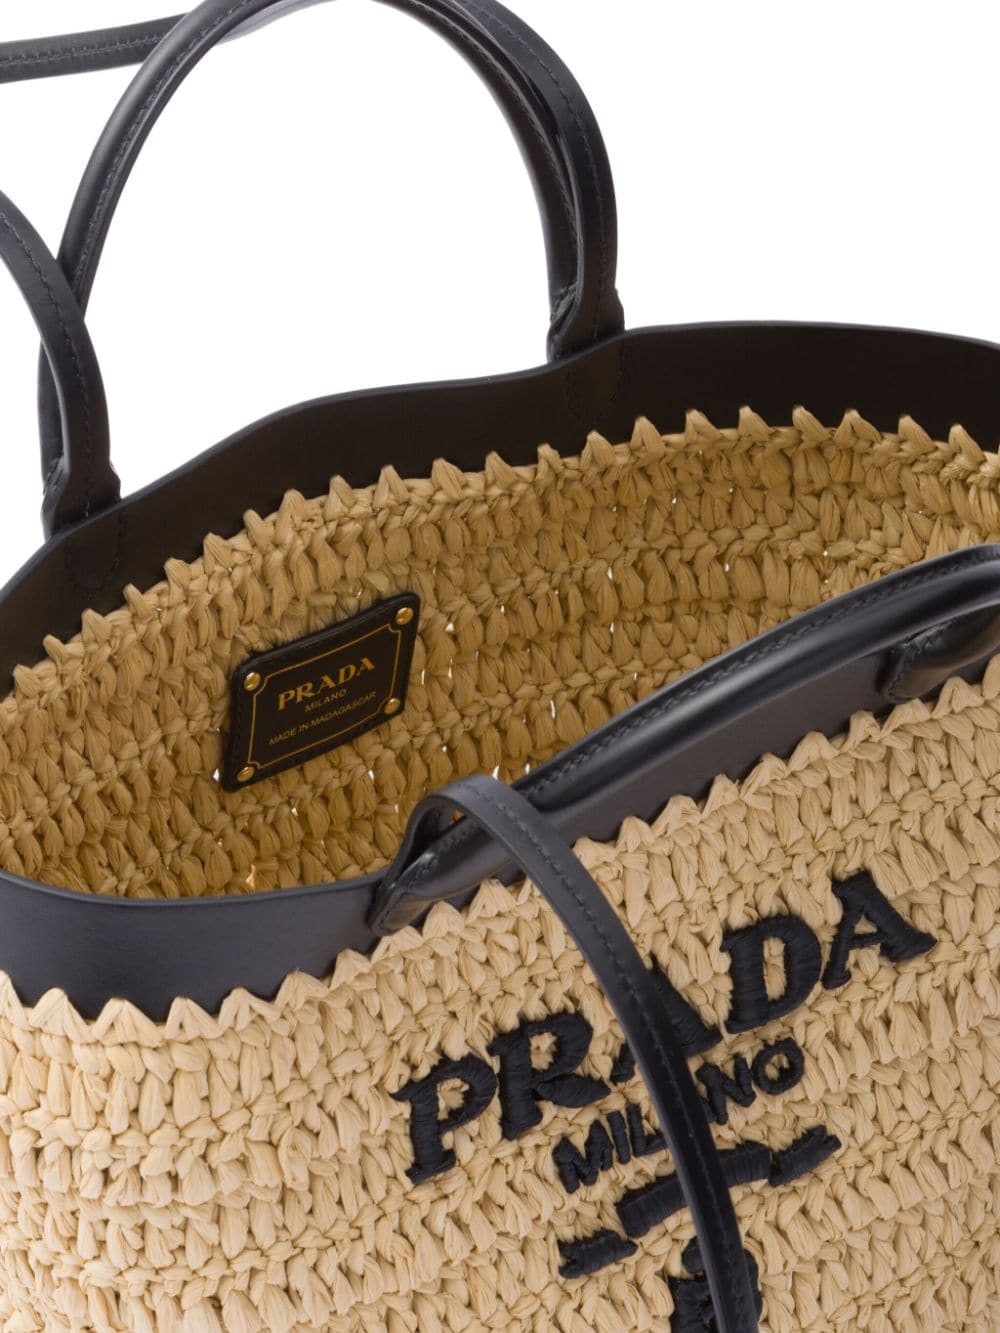 Prada leather-trimmed Woven Tote Bag